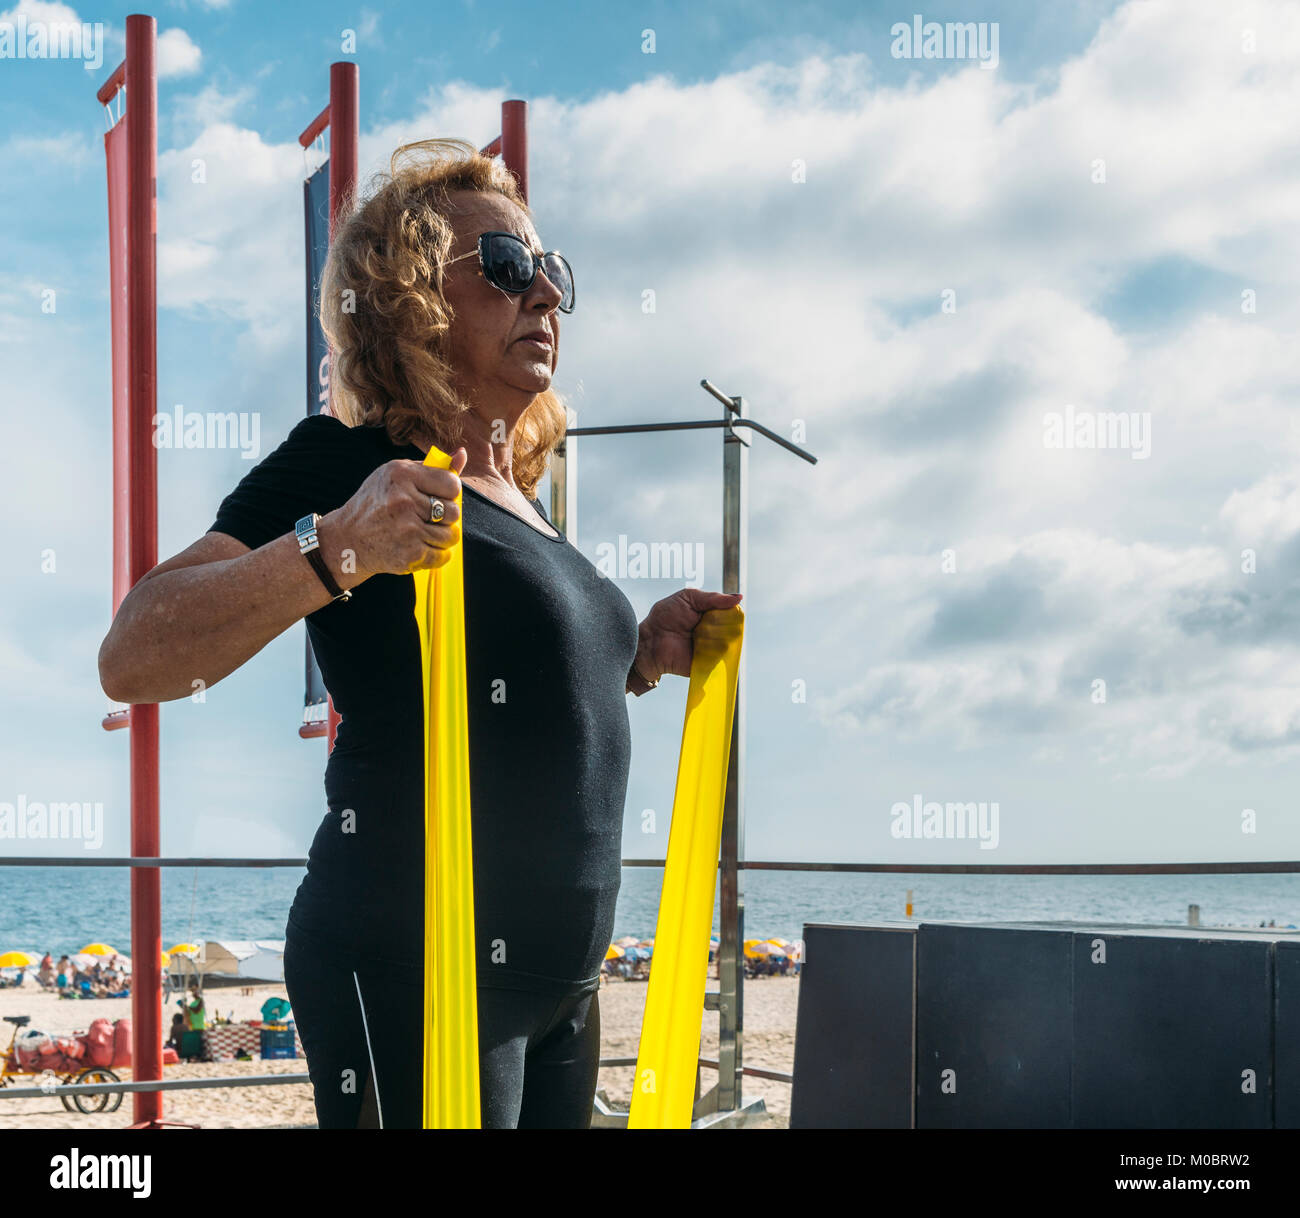 Model Released: Mature woman (70-75) exercising with a stretch cord at open air gym in Ipanema Beach, Rio de Janeiro, Brazil Stock Photo